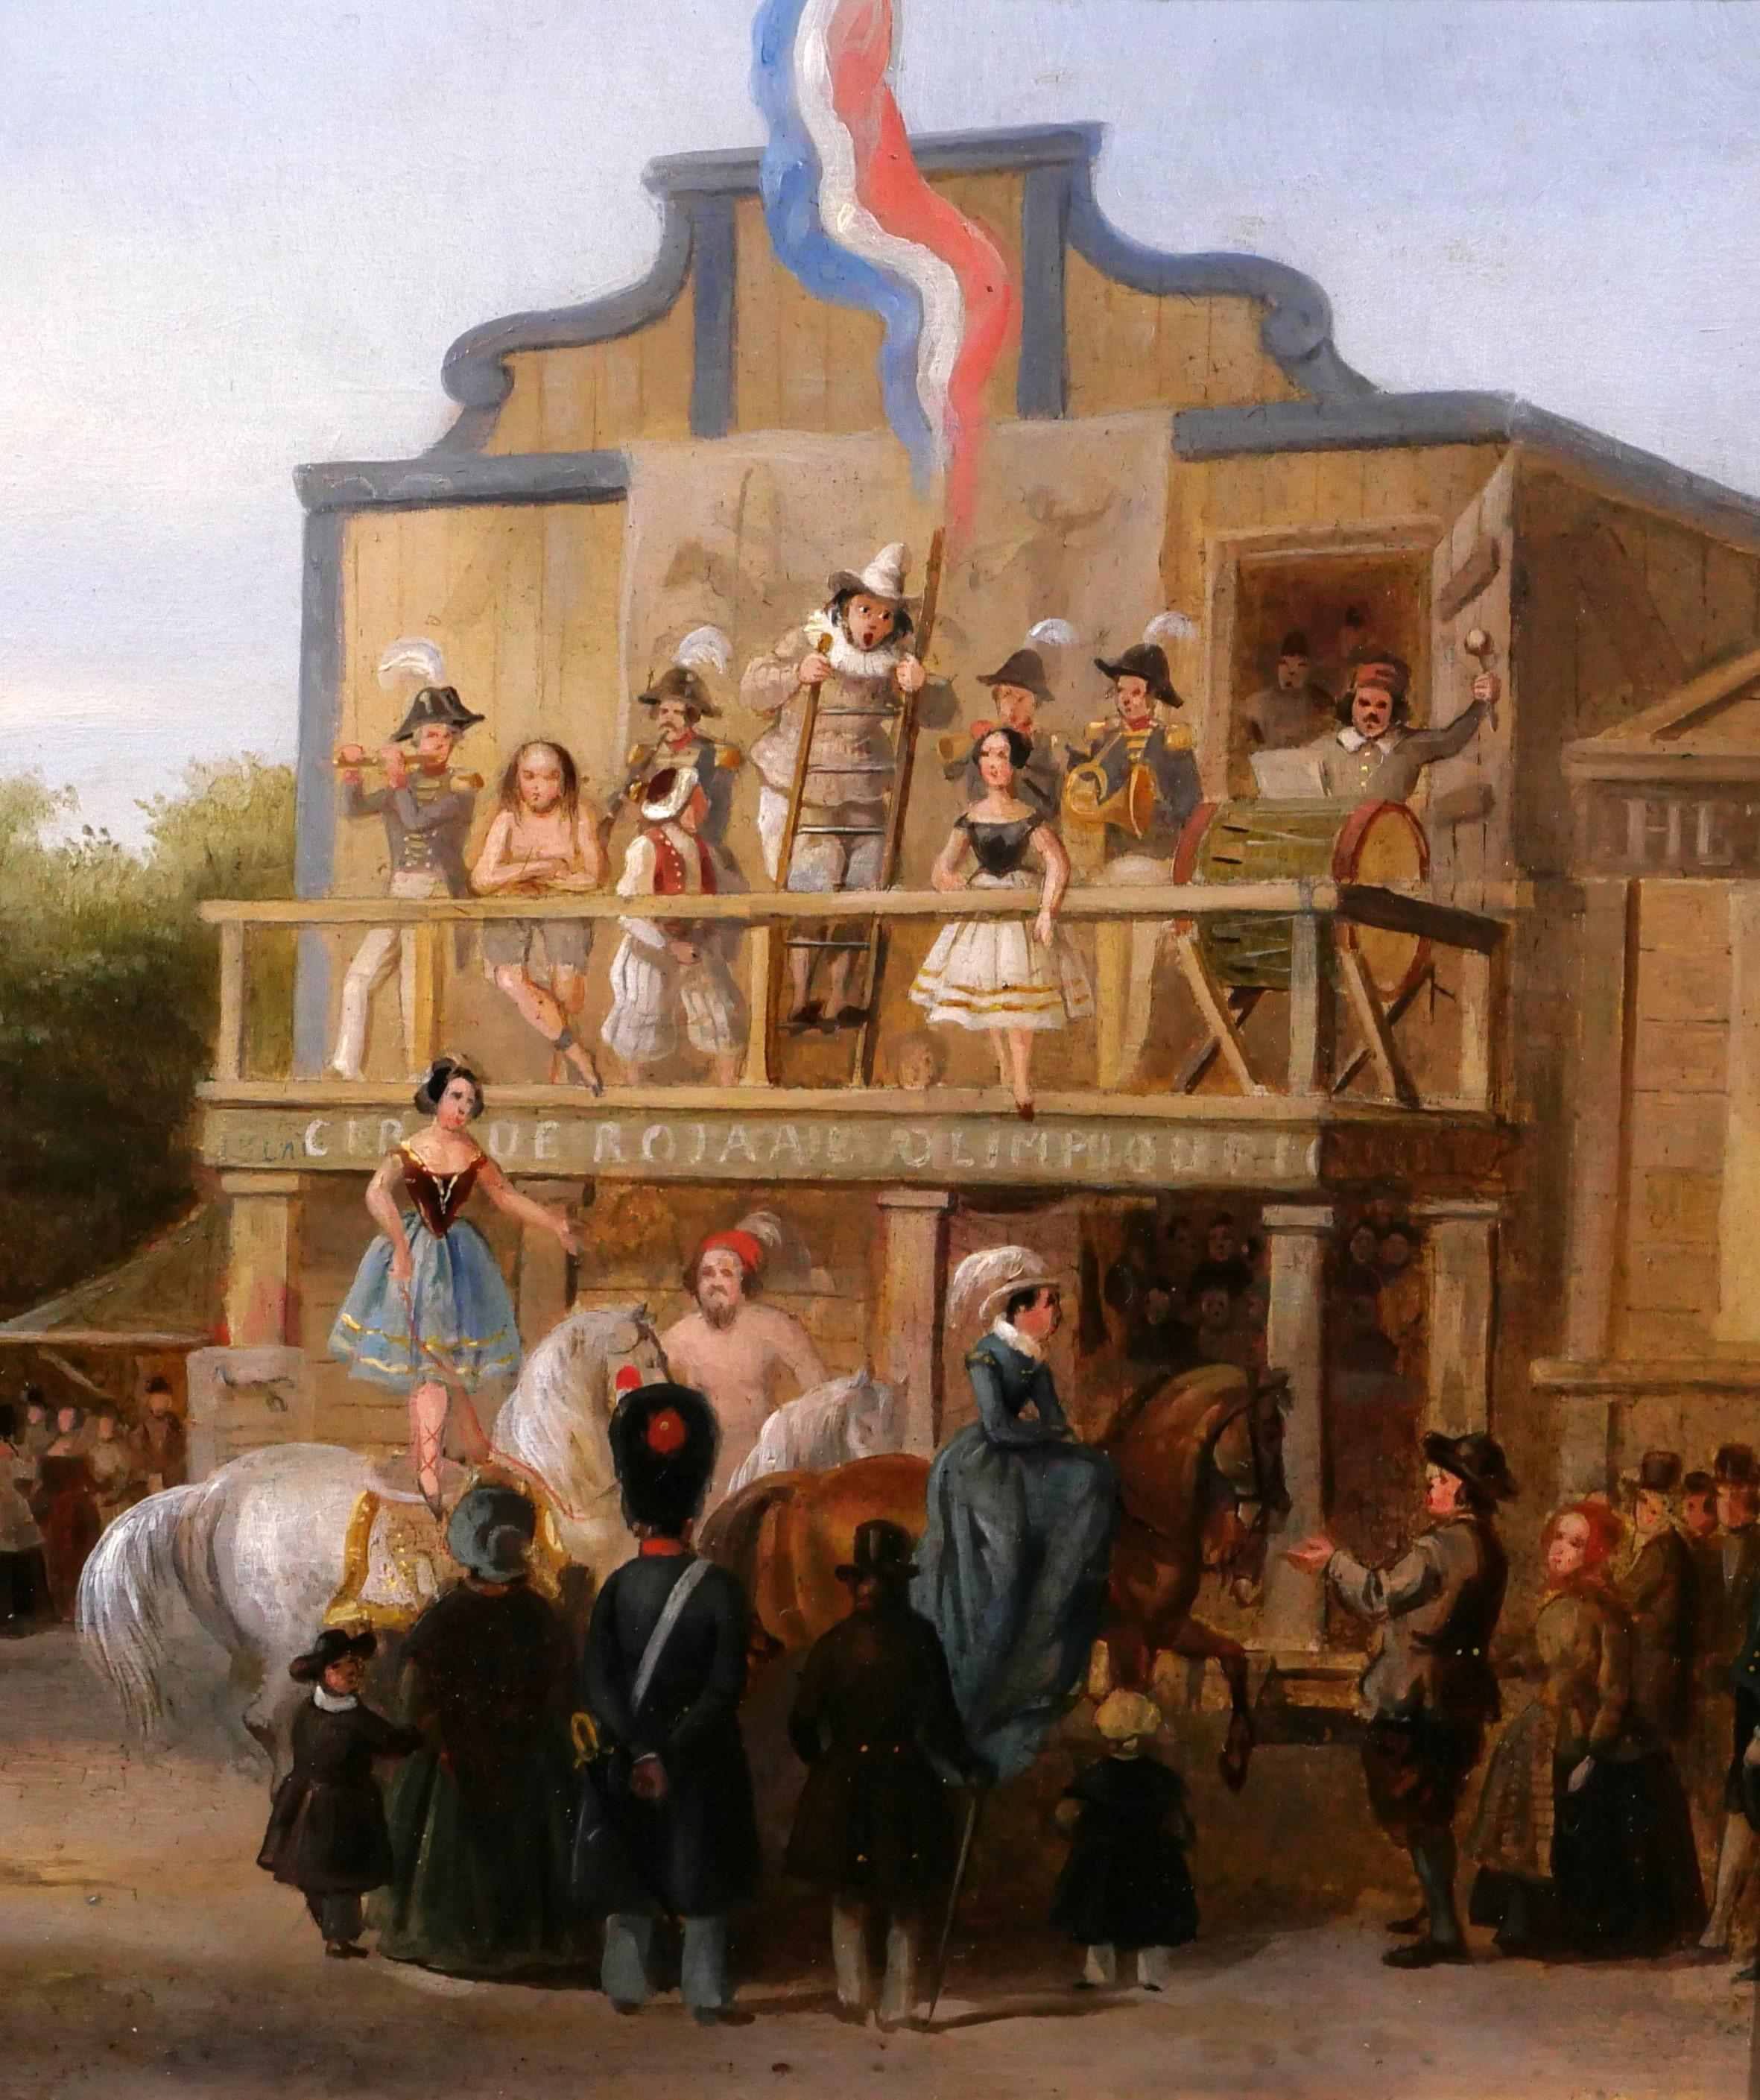 French school circa 1815
Fair scene with actors
Painting, oil on wood
Unsigned
Painting: 20 x 27 cm
Period frame: 30 x 36.5 cm
Very good condition